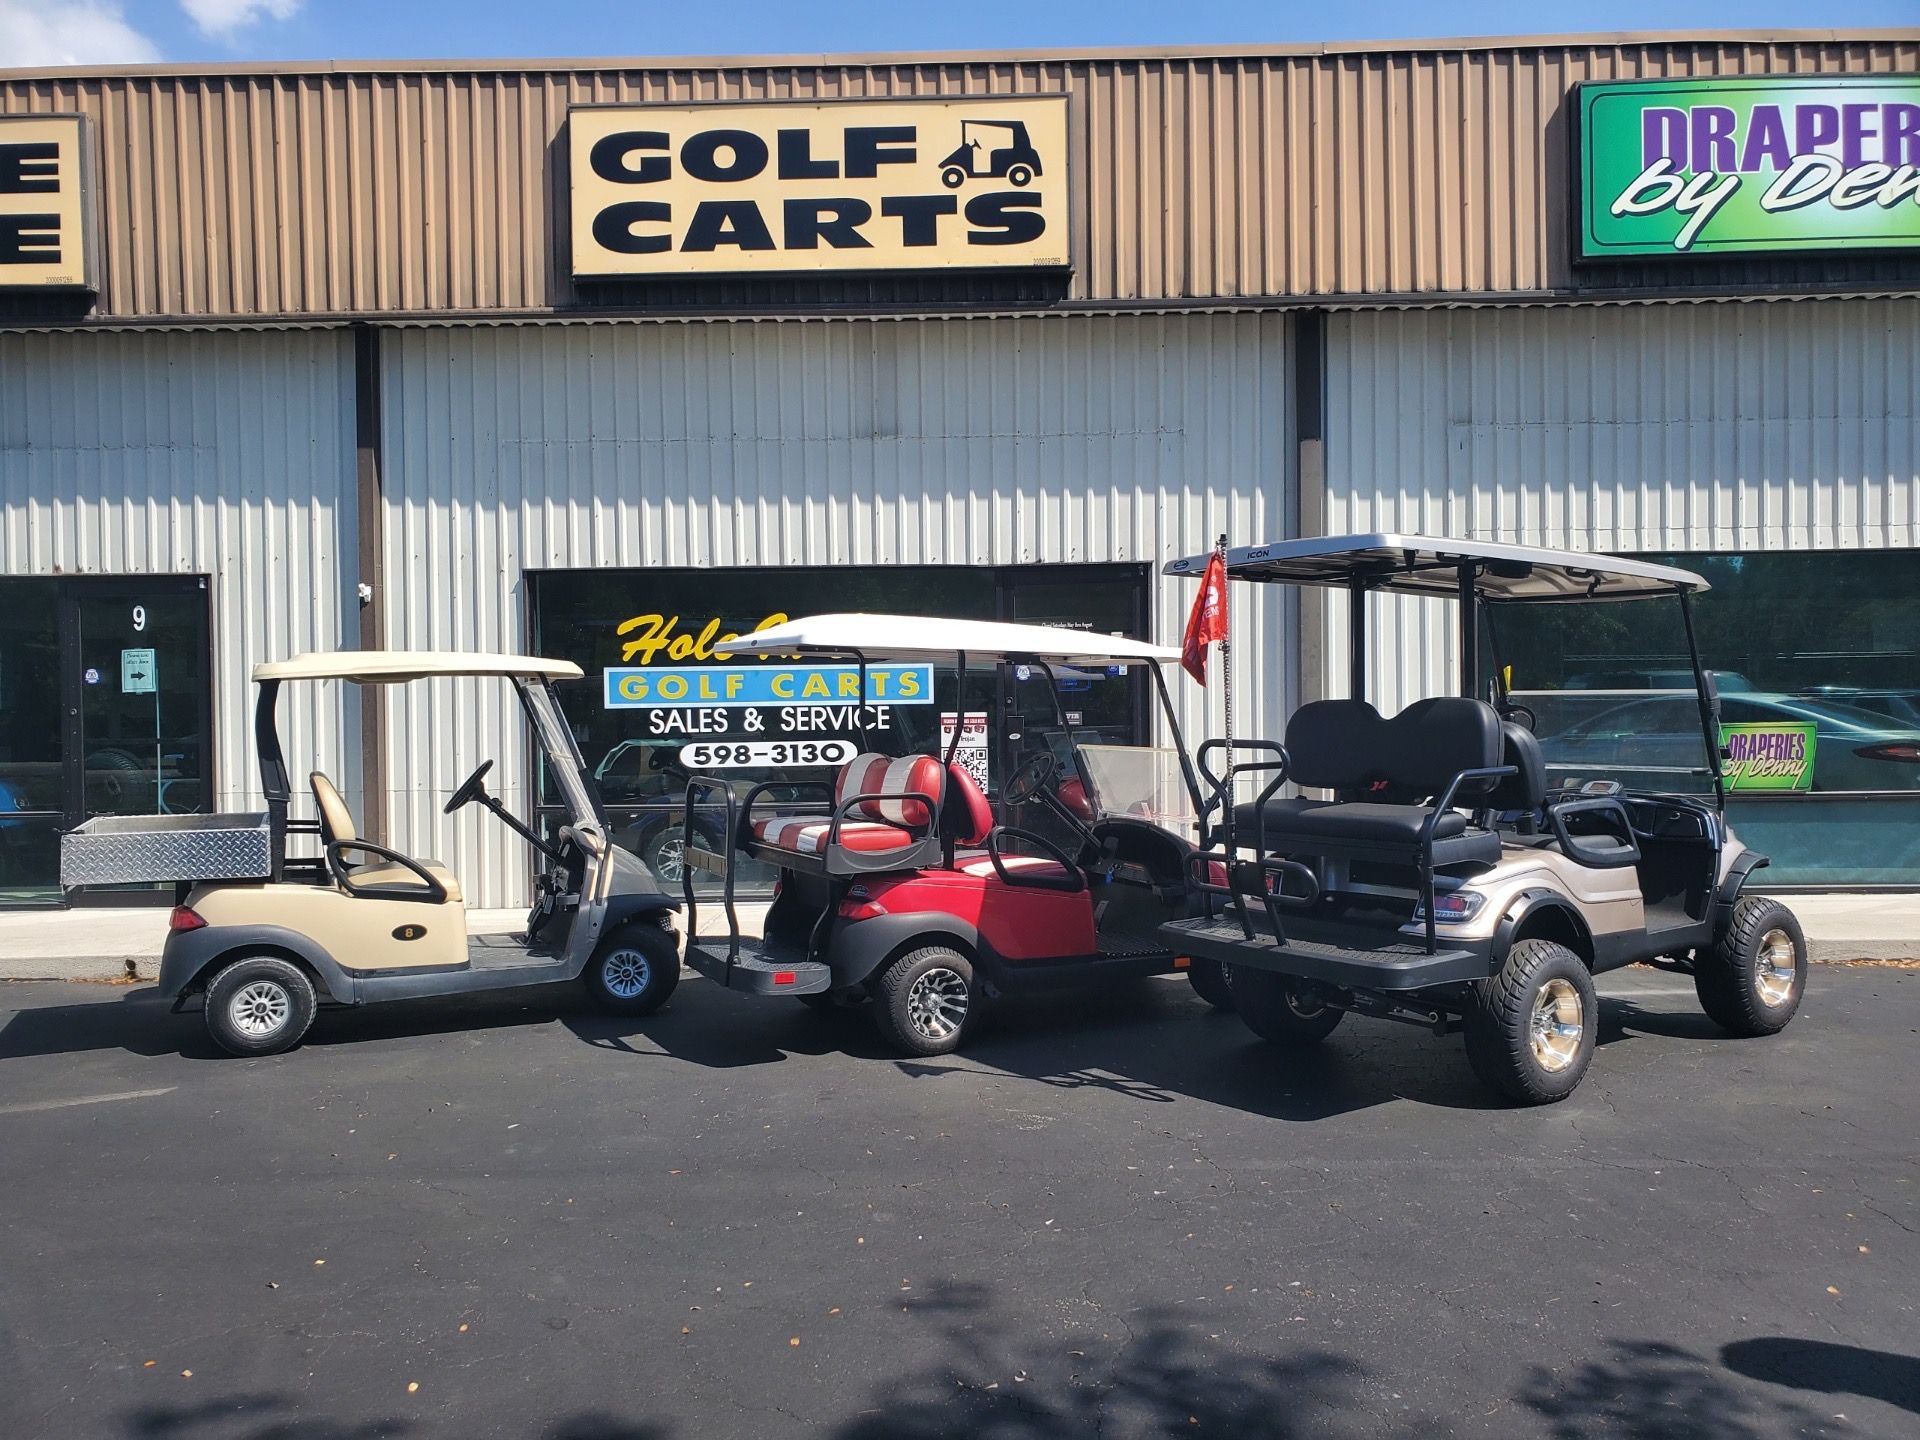 Used golf carts in beige, red, and silver Hole In One Golf Carts